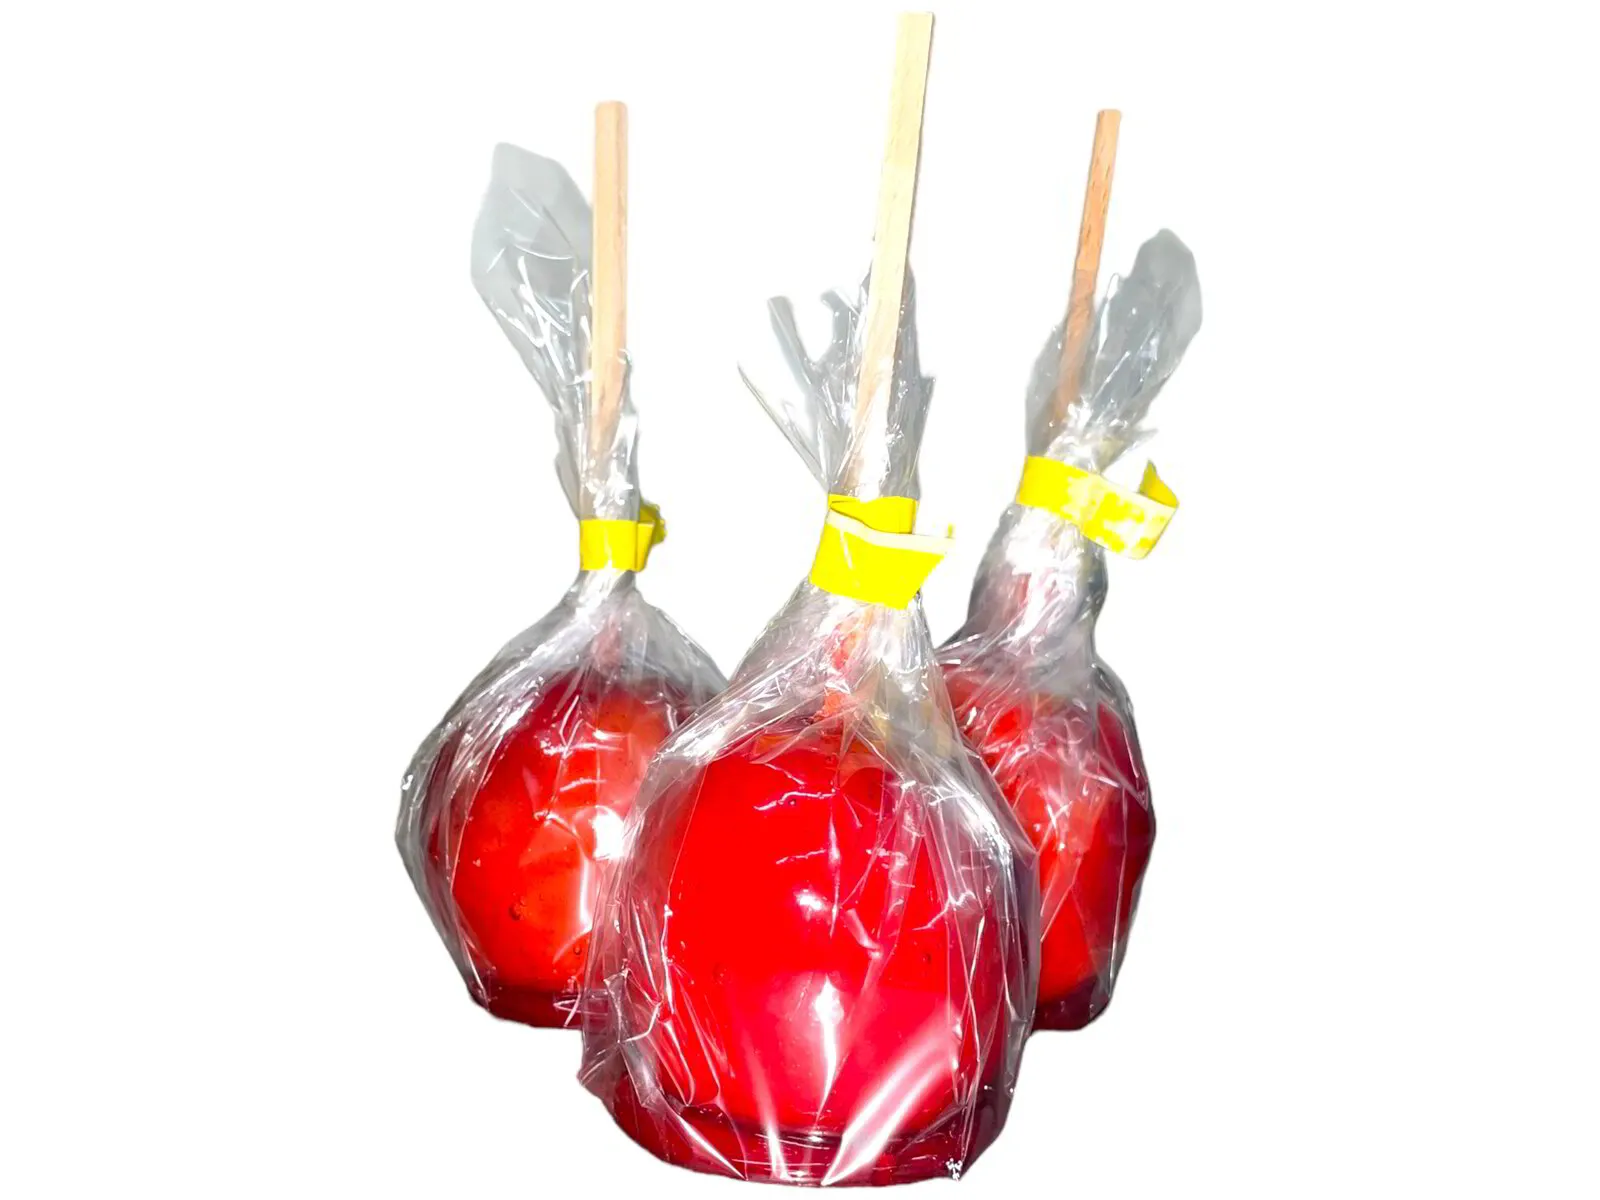 20x Red Toffee Apples